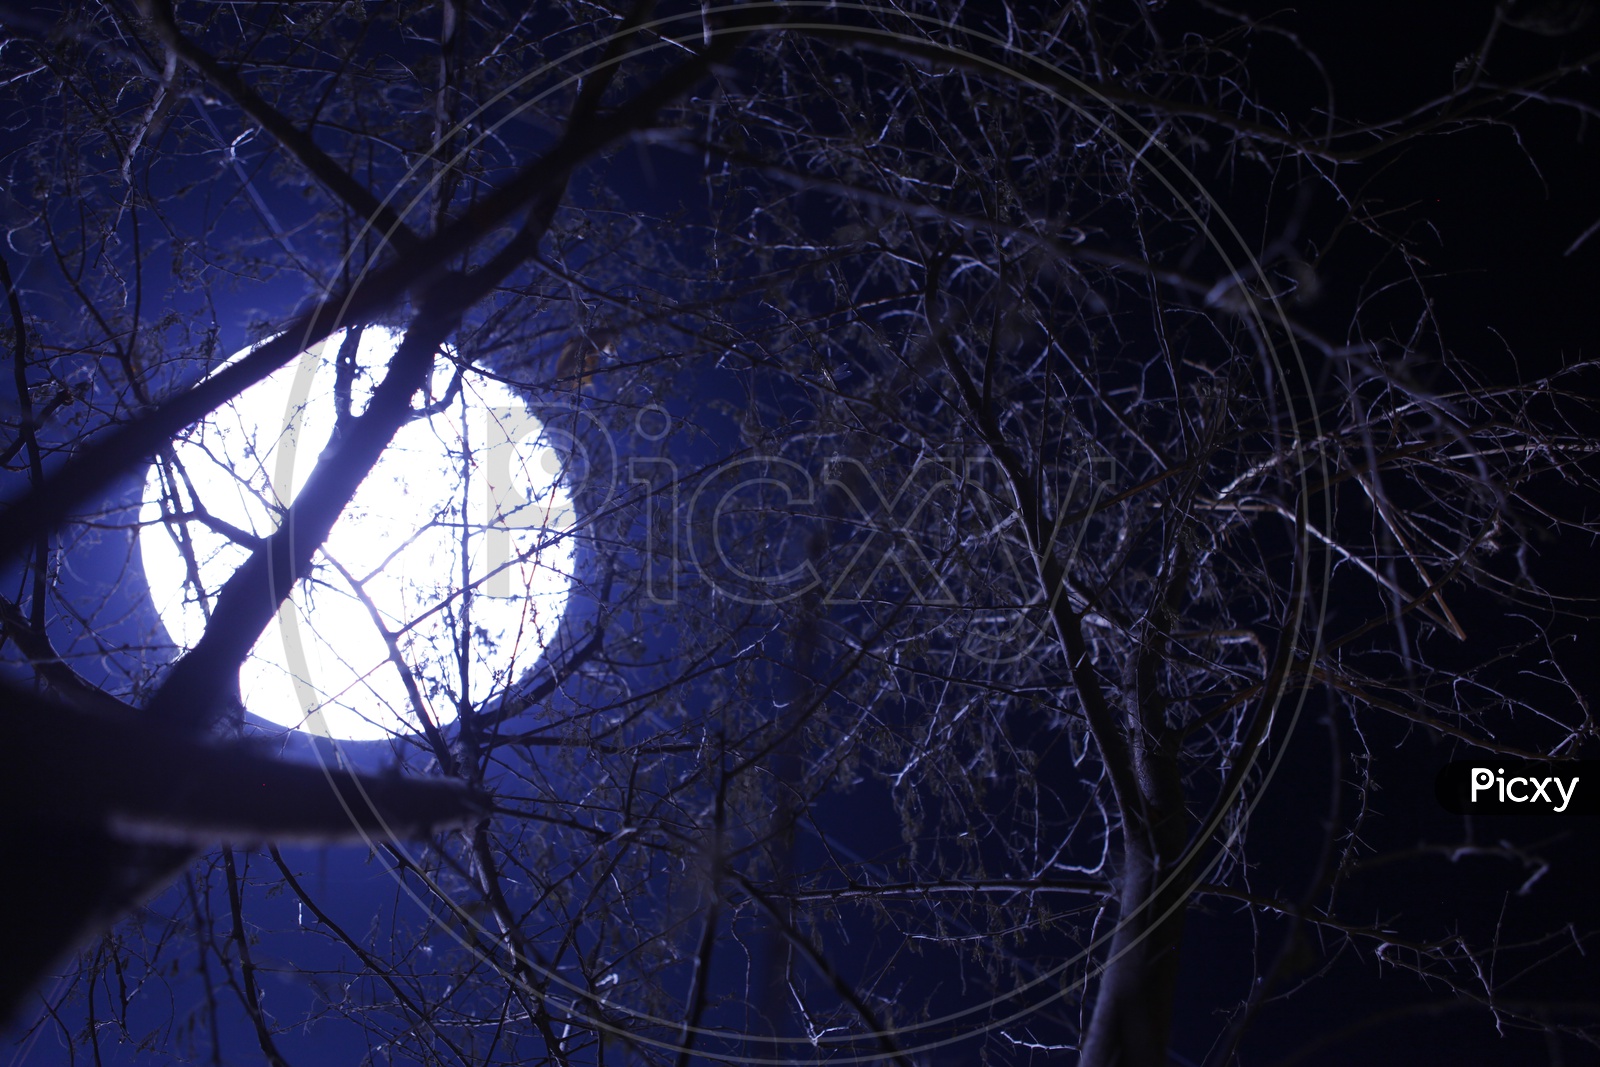 Canopy Of Dried Tree With out Leafs Over A Bright artificial Moon Background